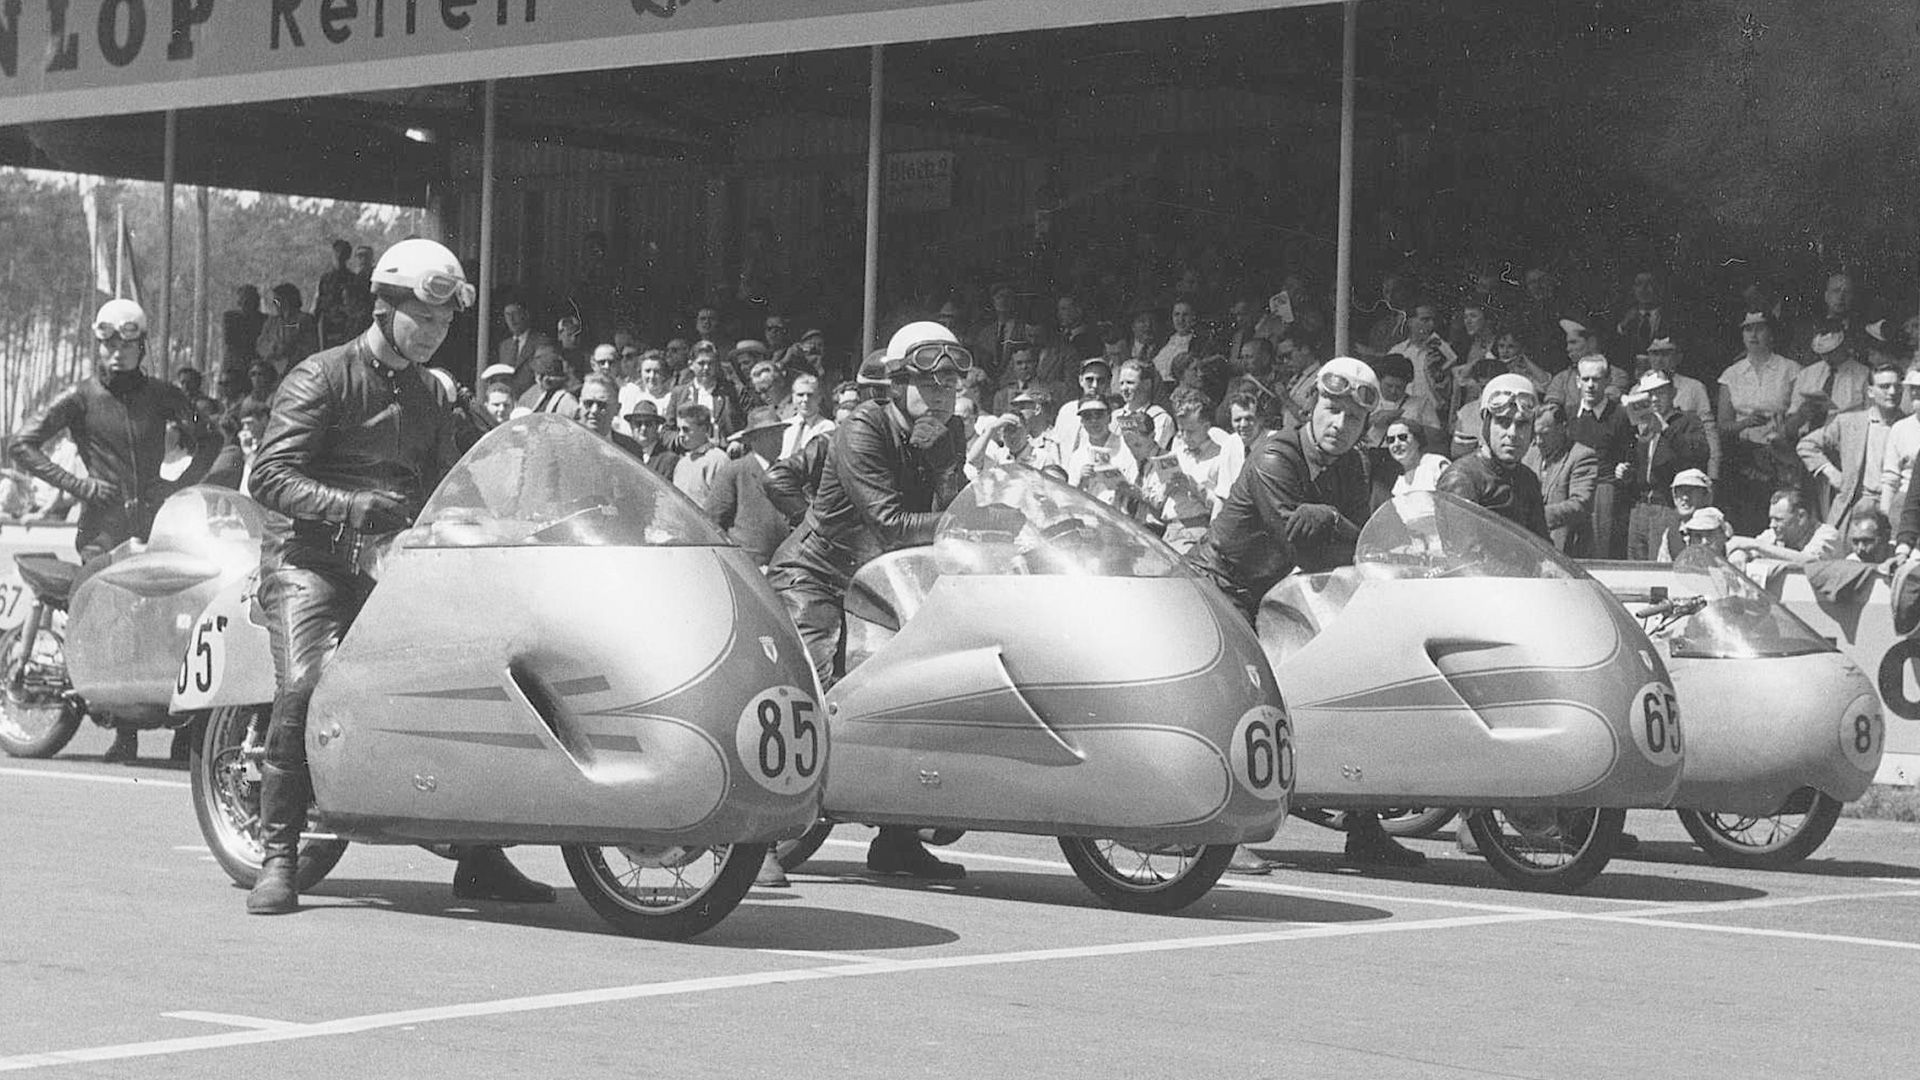 DKW motorcycles on the racetrack